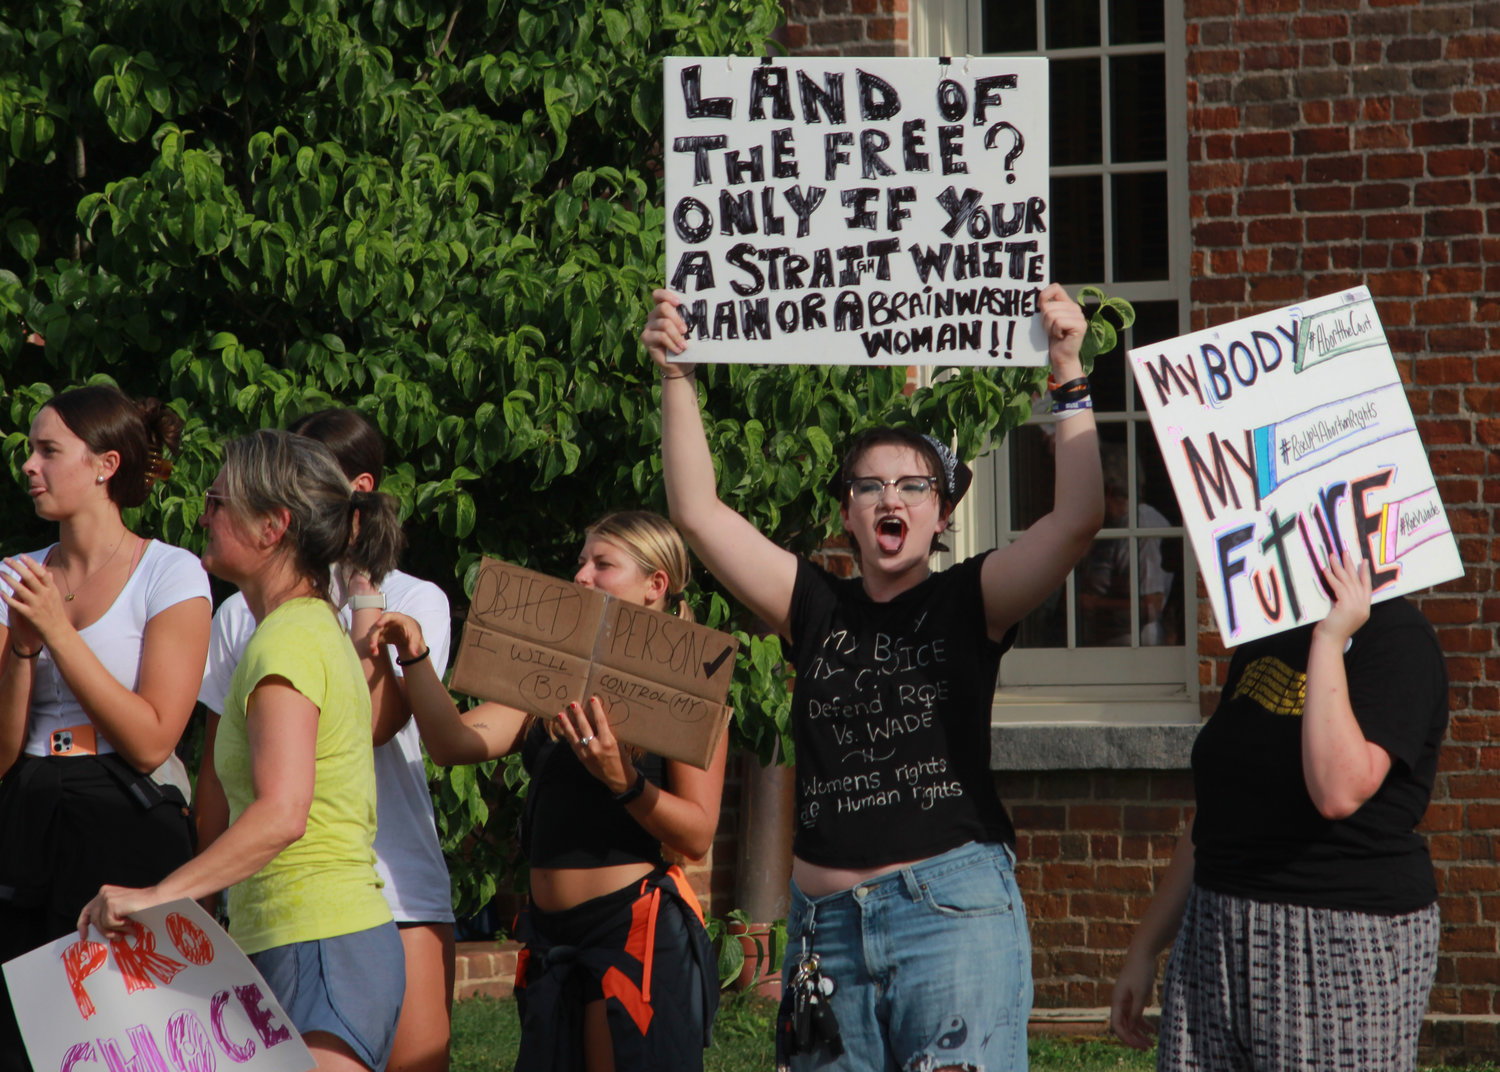 People chant 'we have a voice and it’s pro-choice' as they march around the Historic Courthouse during the abortion and women’s rights rally on Monday in Pittsboro. Many cars that drove by honked in support, while some drivers in the loop shouted profanities and flipped off the protesters as they went by.